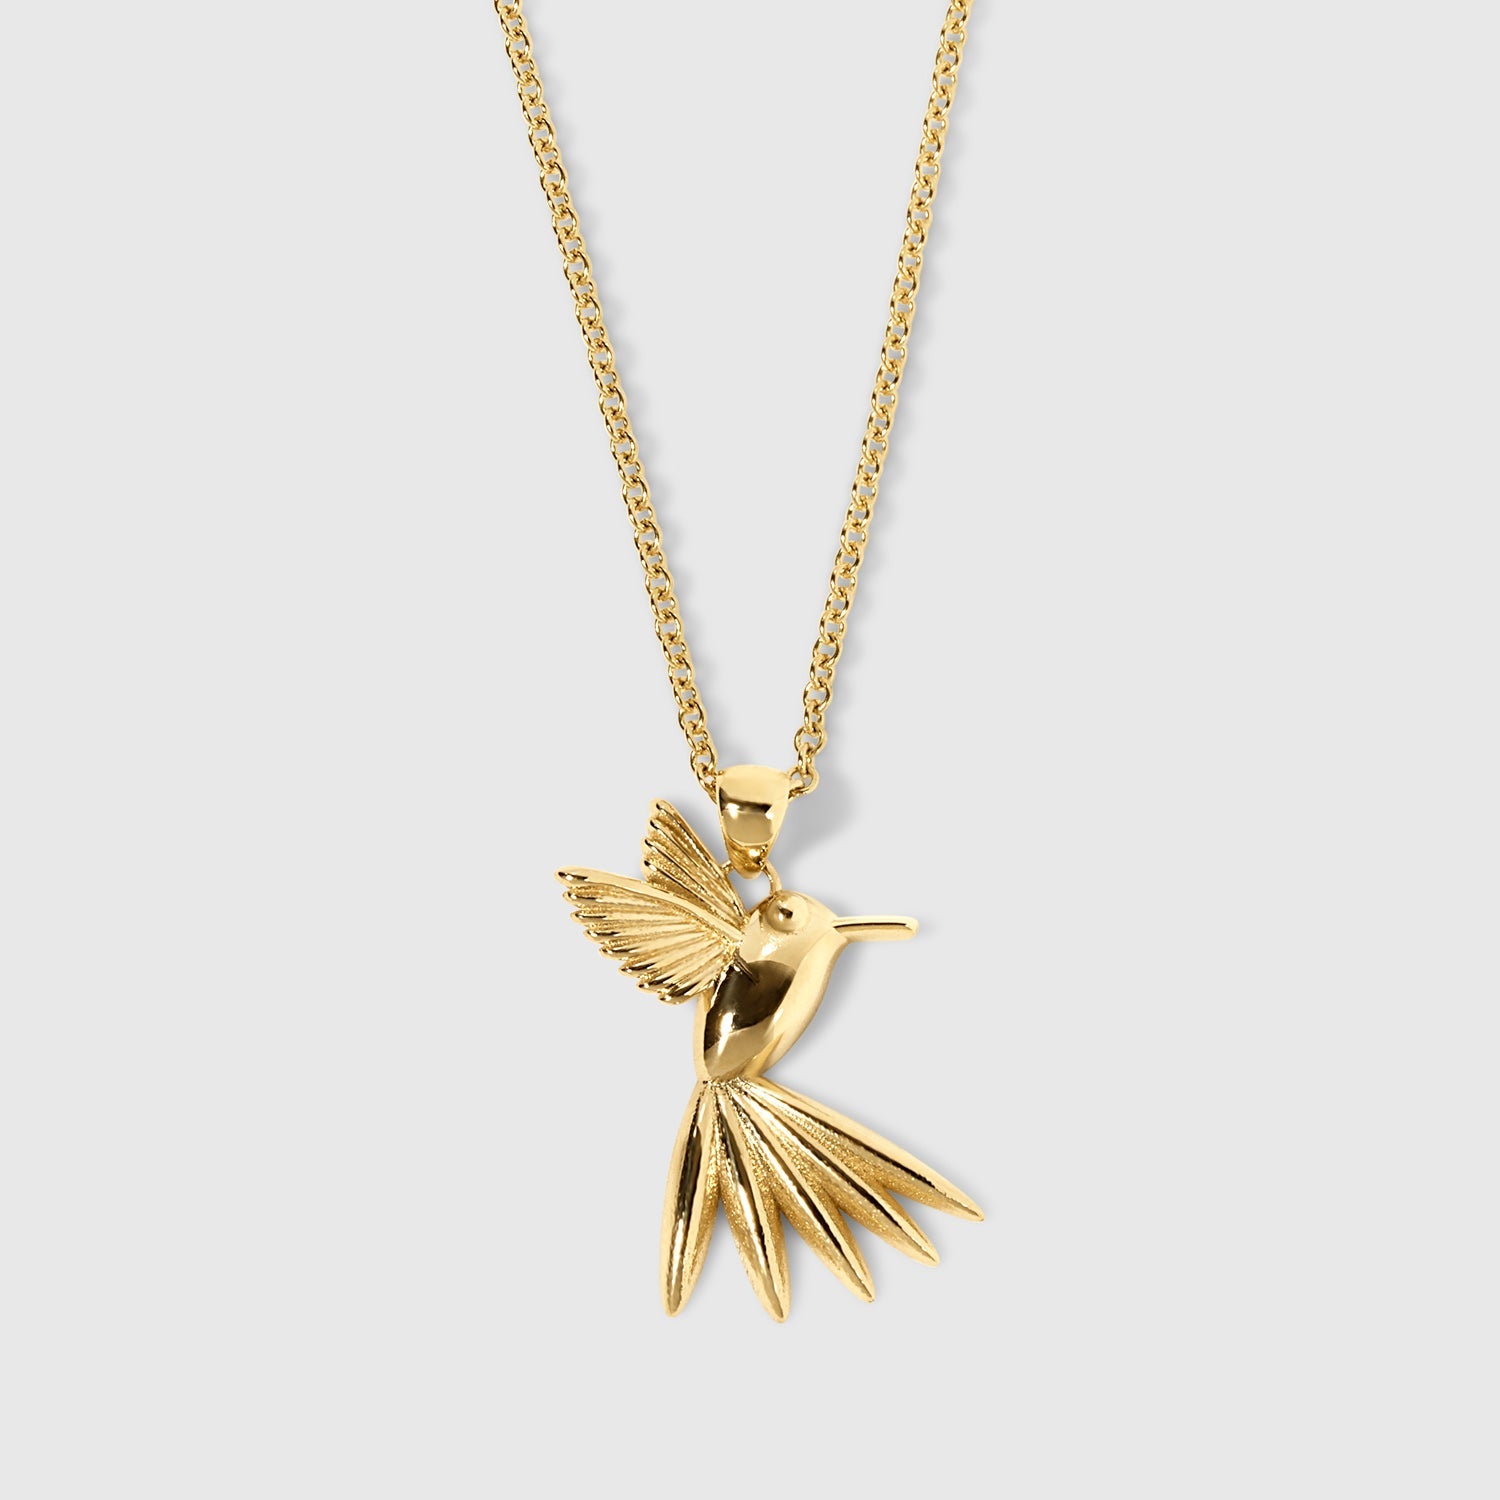 Golden Hummingbird Pendant & Necklace in Solid Gold – The “Humming Beauty” Set - Aurora Laffite Jewelry